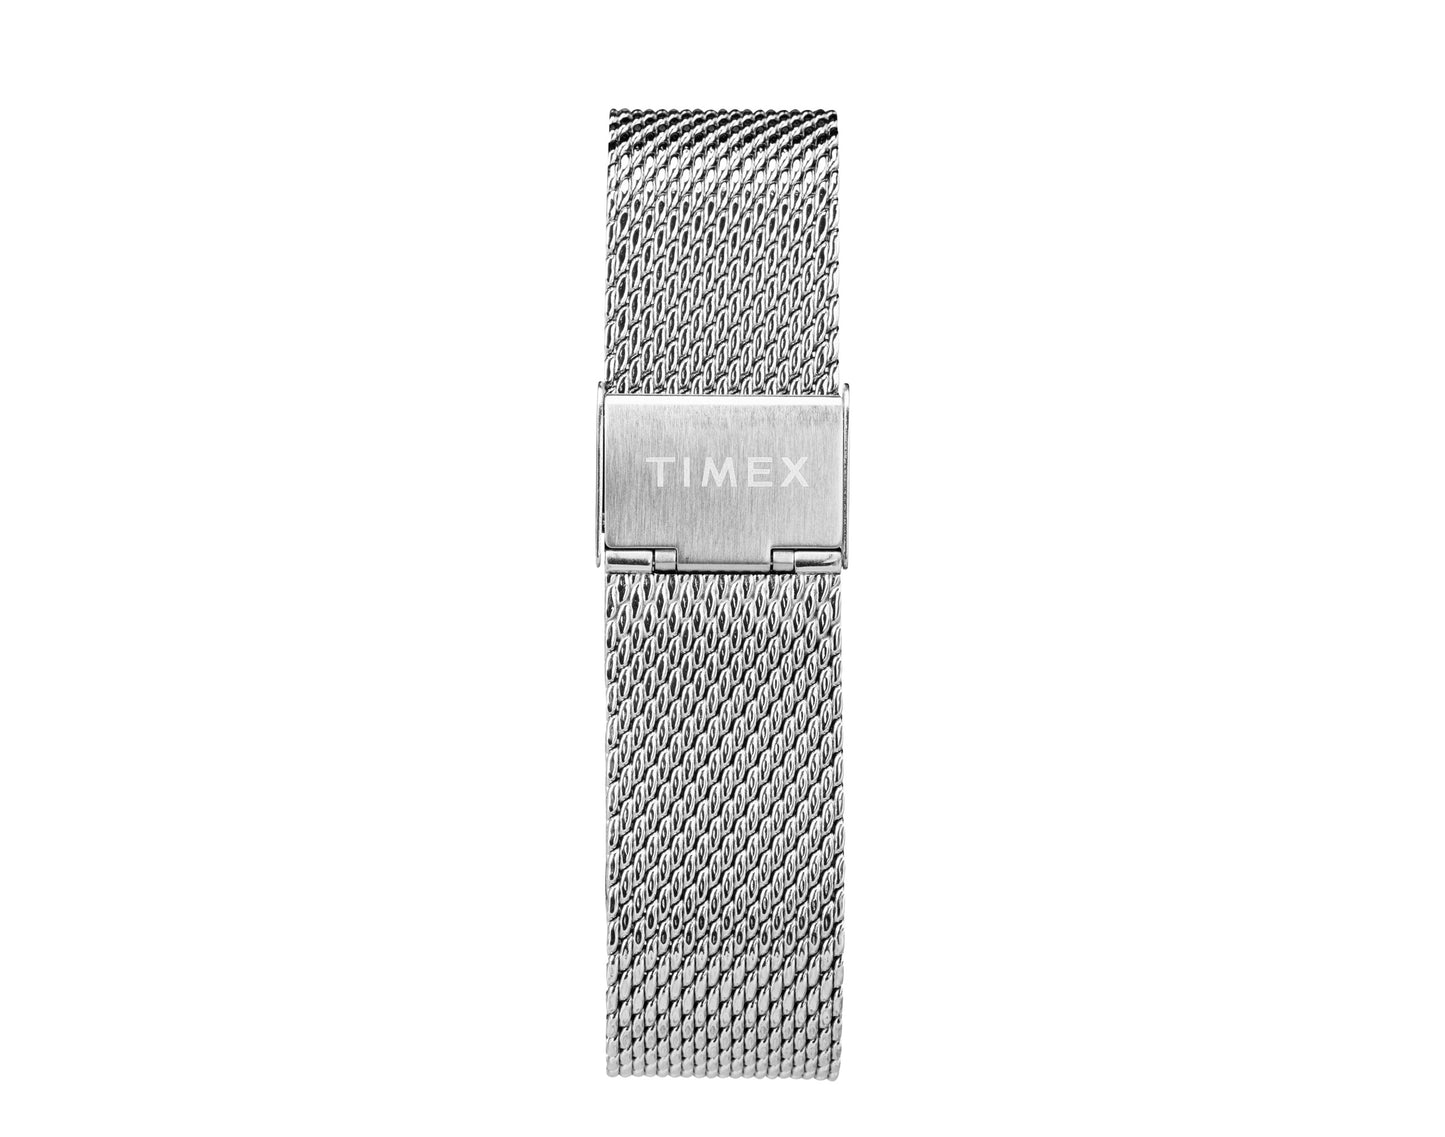 Timex x Todd Snyder Beekman 40mm Stainless Steel Mesh Band Watch